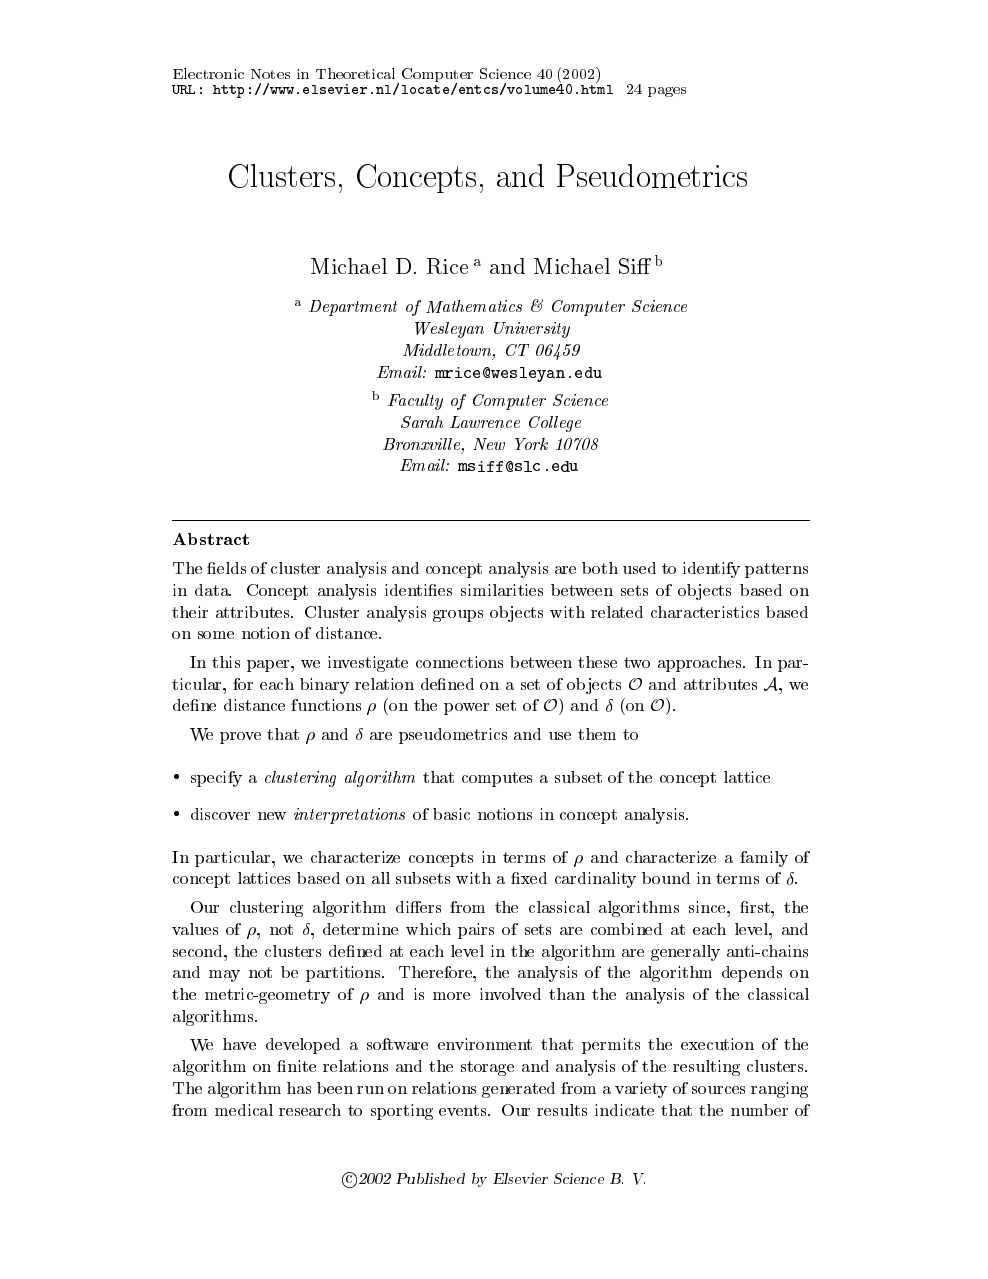 Clusters Concepts And Pseudometrics Topic Of Research Paper In Computer And Information Sciences Download Scholarly Article Pdf And Read For Free On Cyberleninka Open Science Hub